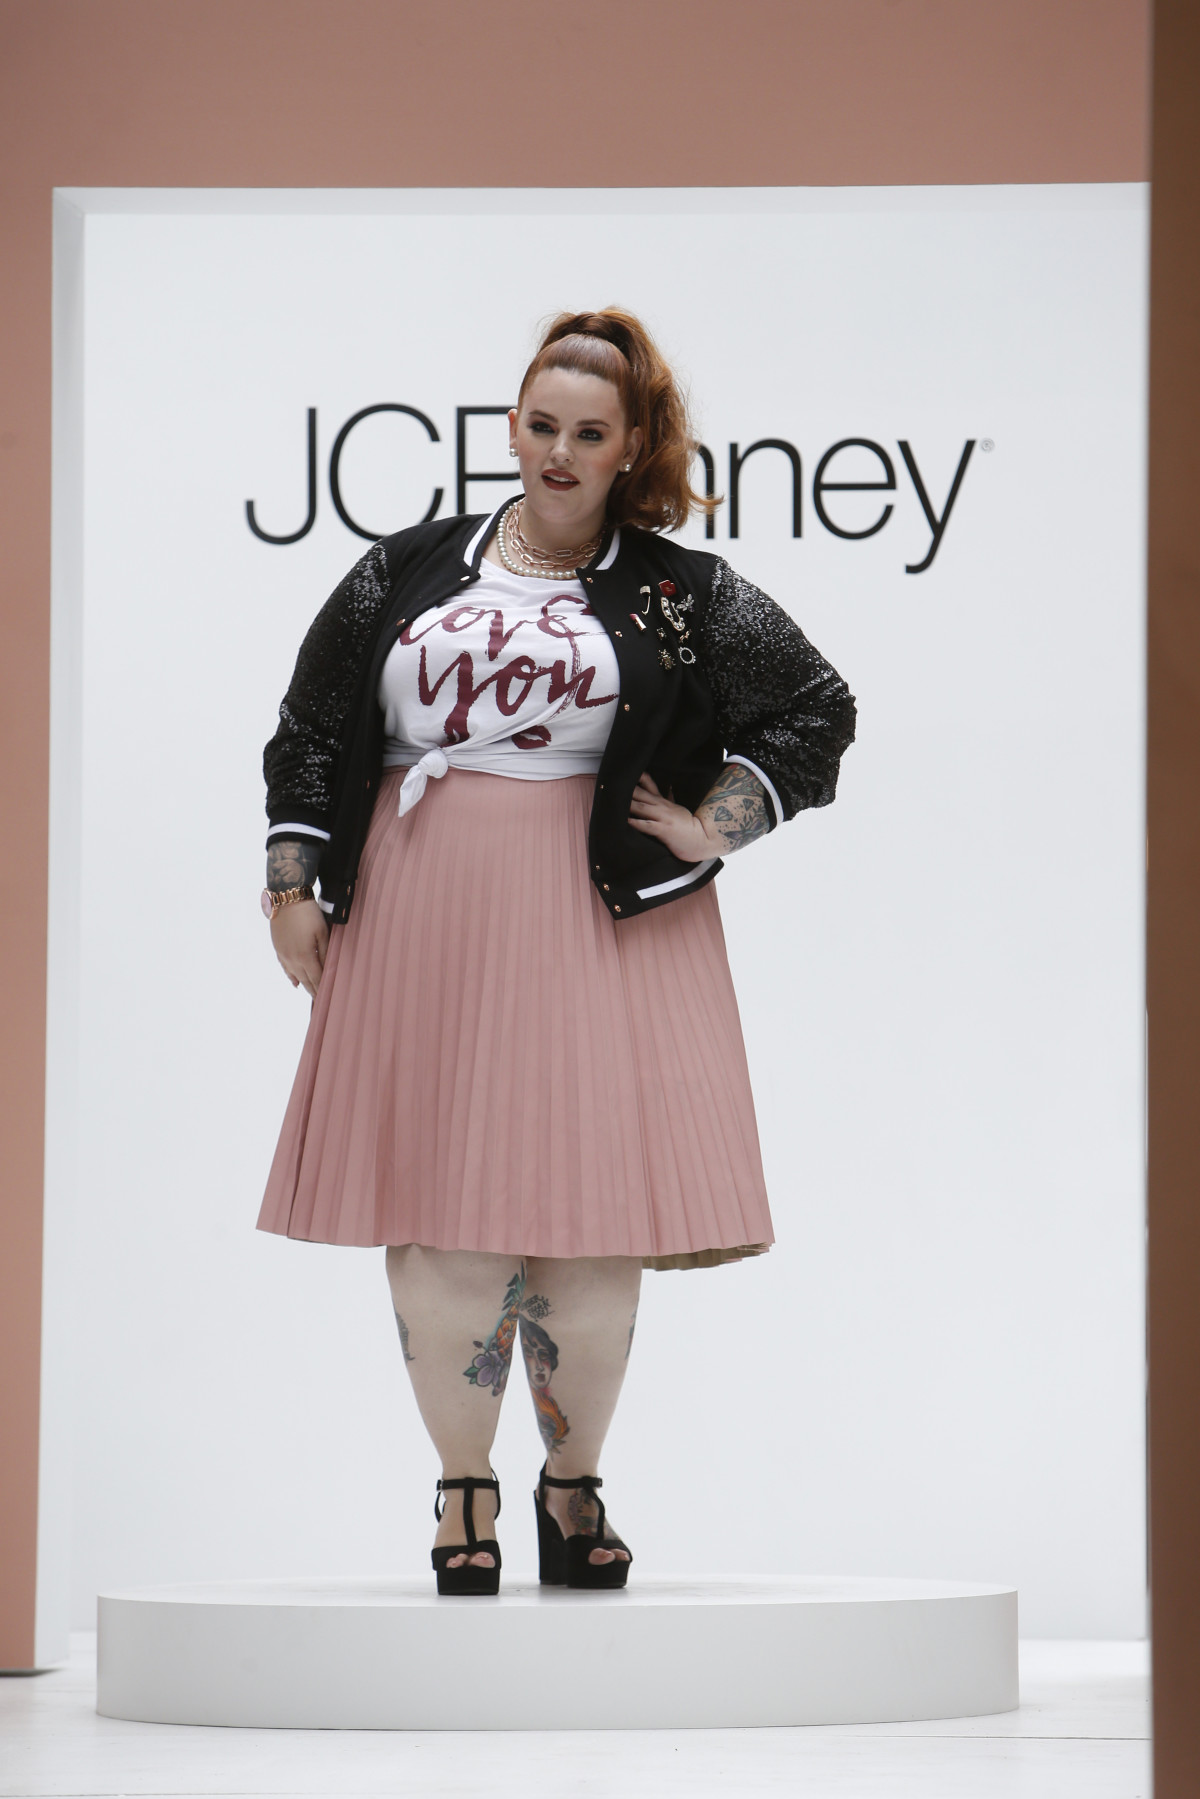 Tess Holliday wears Ashley Nell Tipton for JCPenney Boutique+ Fashion Show on Tuesday, Sept. 6, 2016, in New York. (Photo by Jason DeCrow/Invision for JCPenney/AP Images)